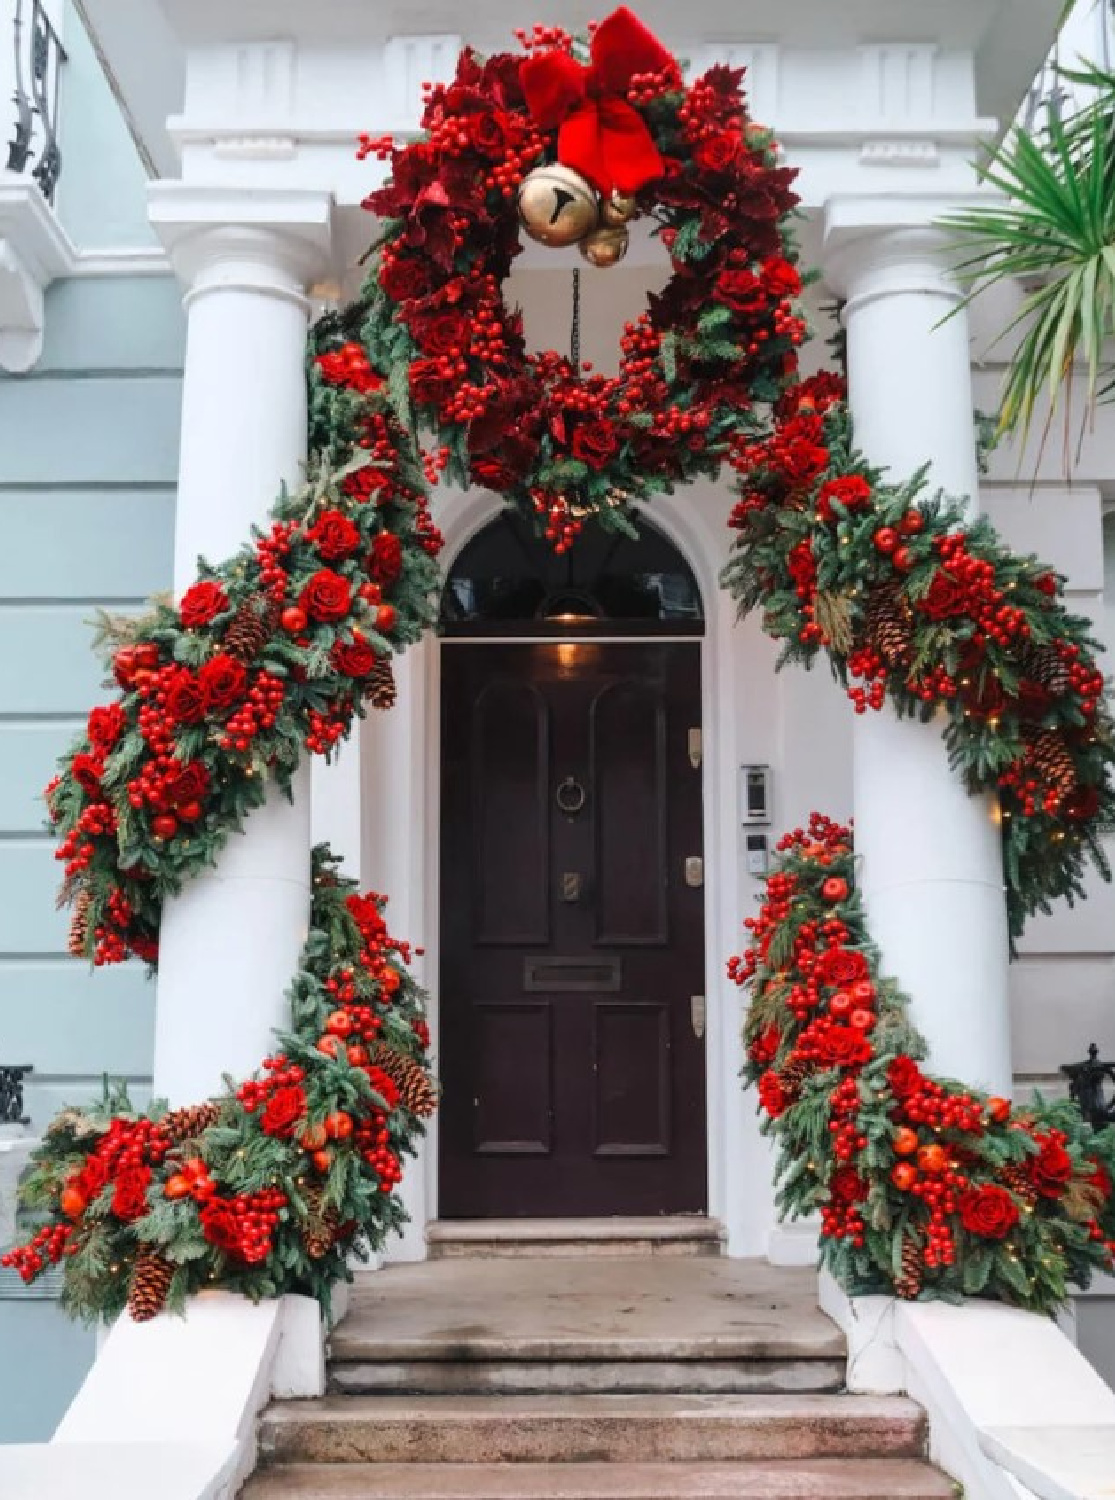 Fanciful Christmas decorated Notting Hill entrance and front door with red garlands and wreath - Jou Jou Travels. #britishchristmas #christmascurbappeal #anglophilechristmas